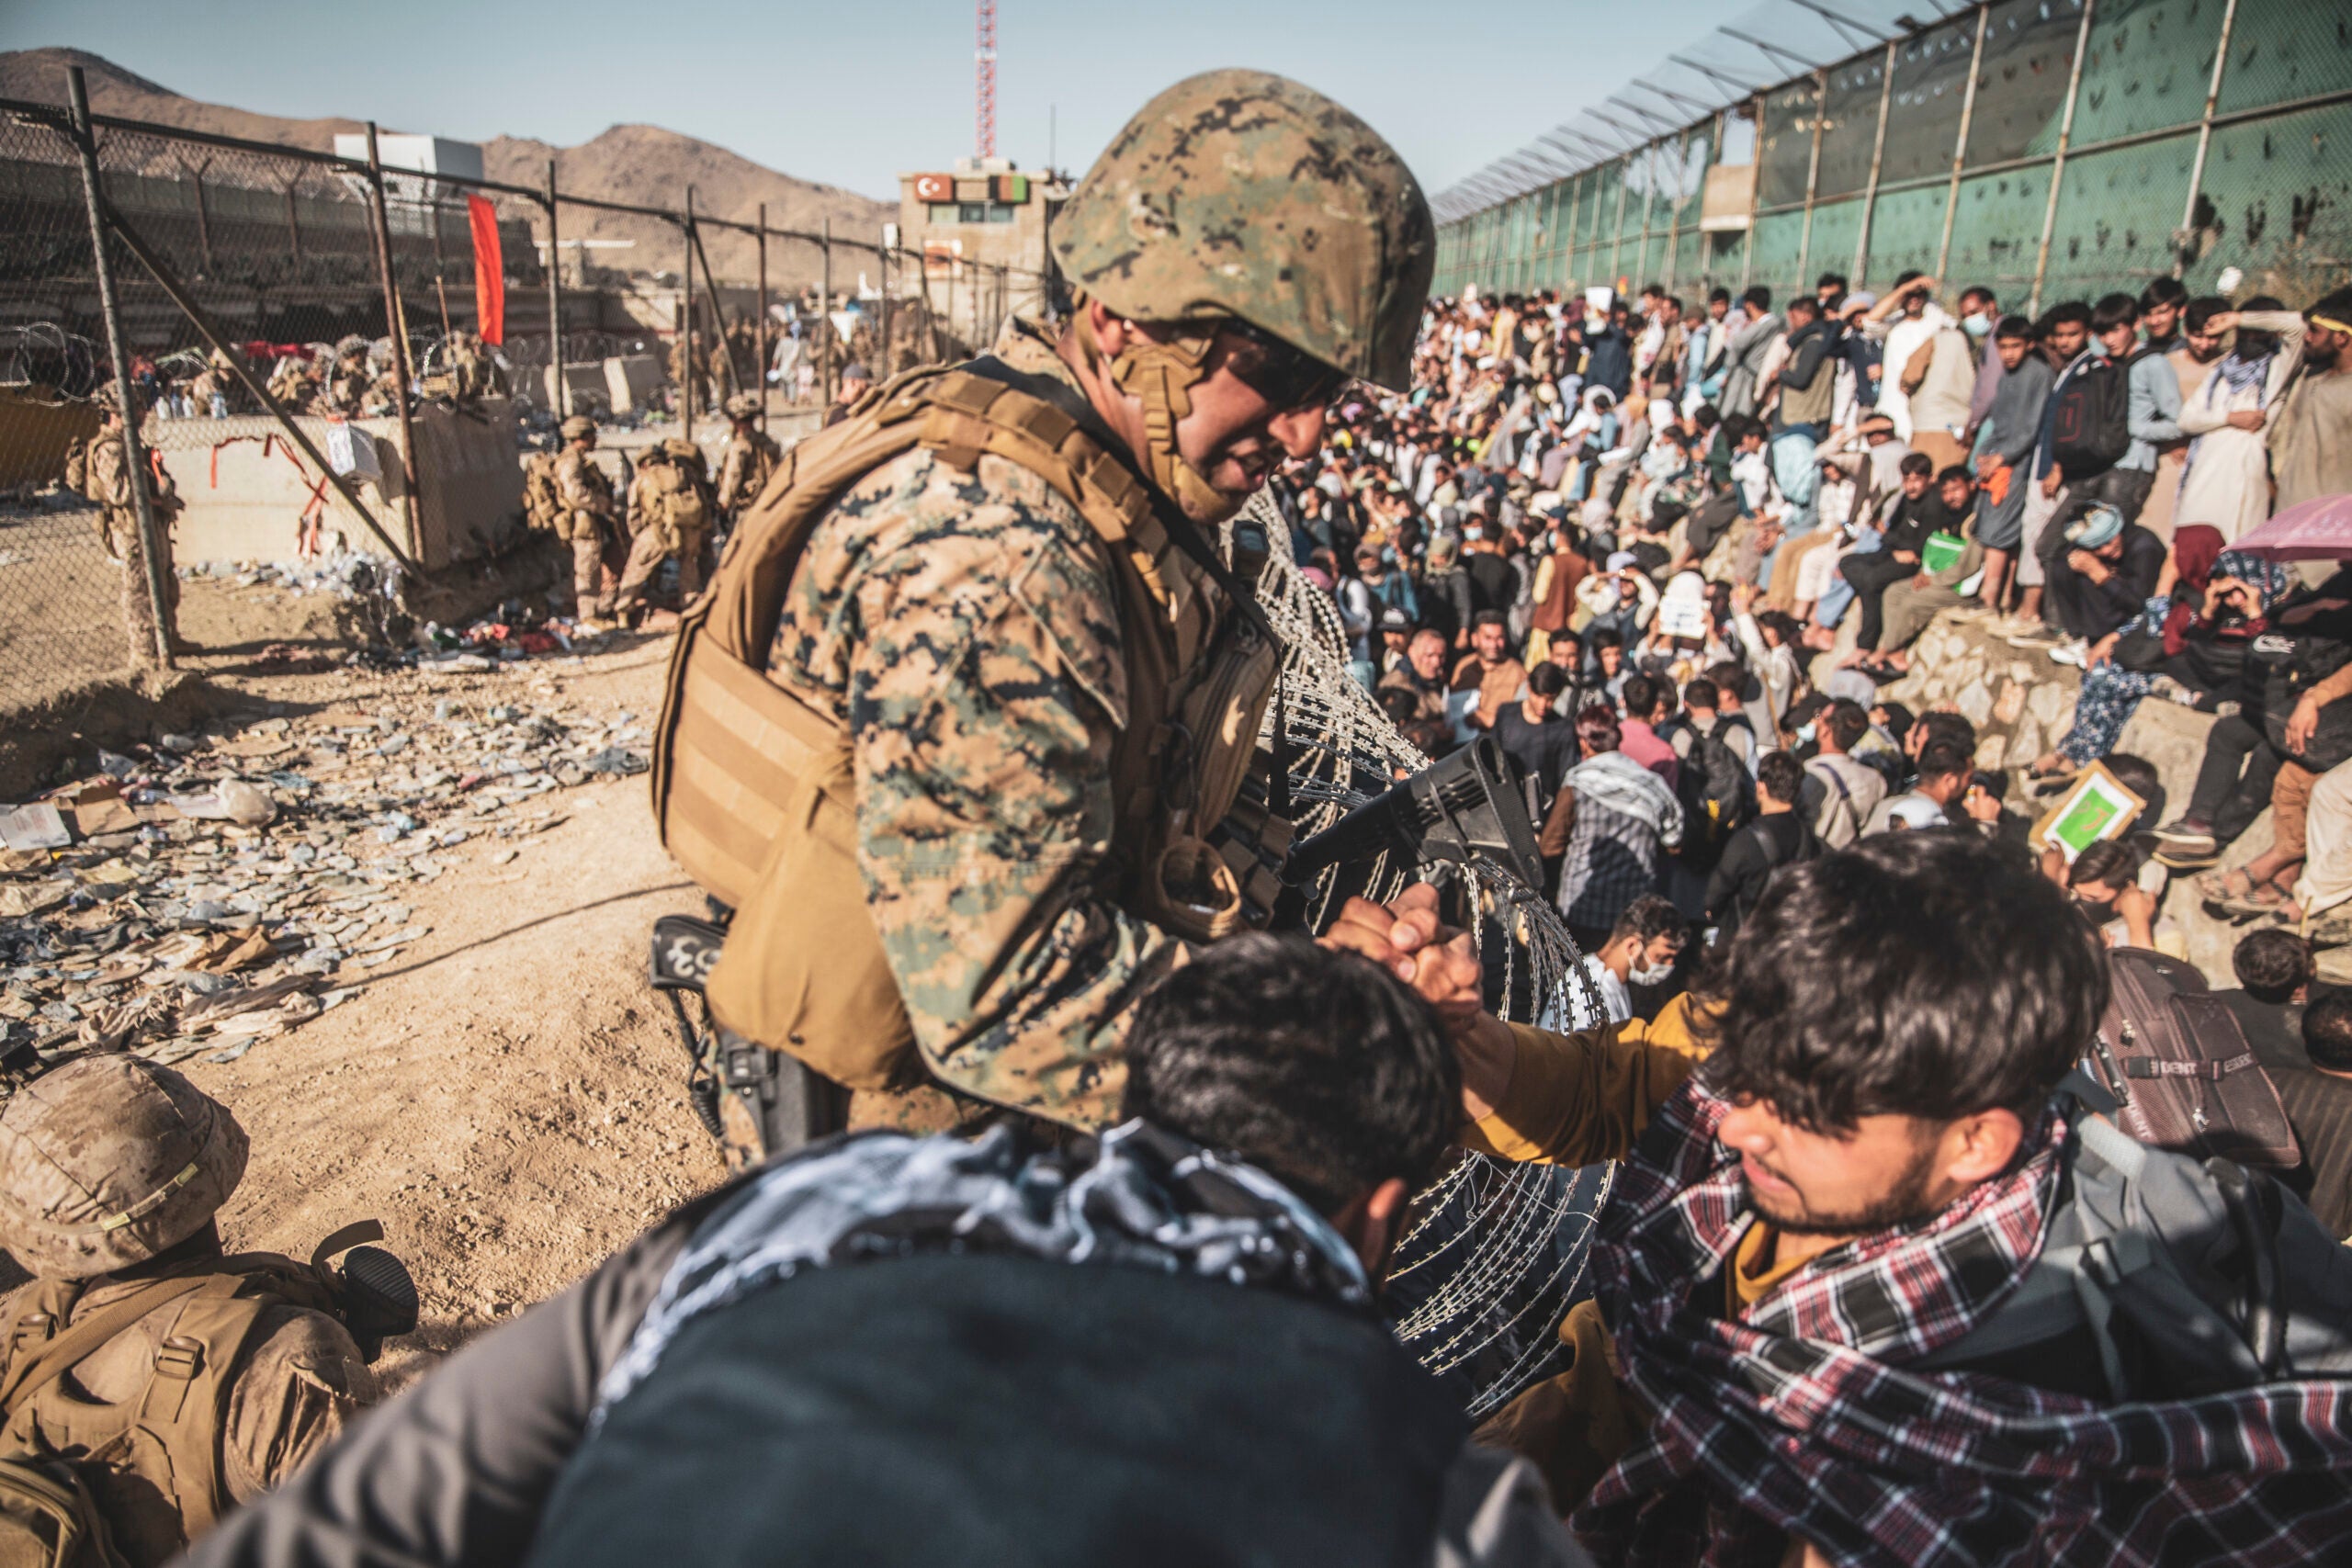 A U.S. Marine with Joint Task Force - Crisis Response assists evacuees at an Evacuation Control Check Point (ECC) during an evacuation at Hamid Karzai International Airport, Kabul, Afghanistan, Aug. 26. U.S. service members are assisting the Department of State with a non-combatant evacuation operation (NEO) in Afghanistan. (U.S. Marine Corps photo by Staff Sgt. Victor Mancilla) 